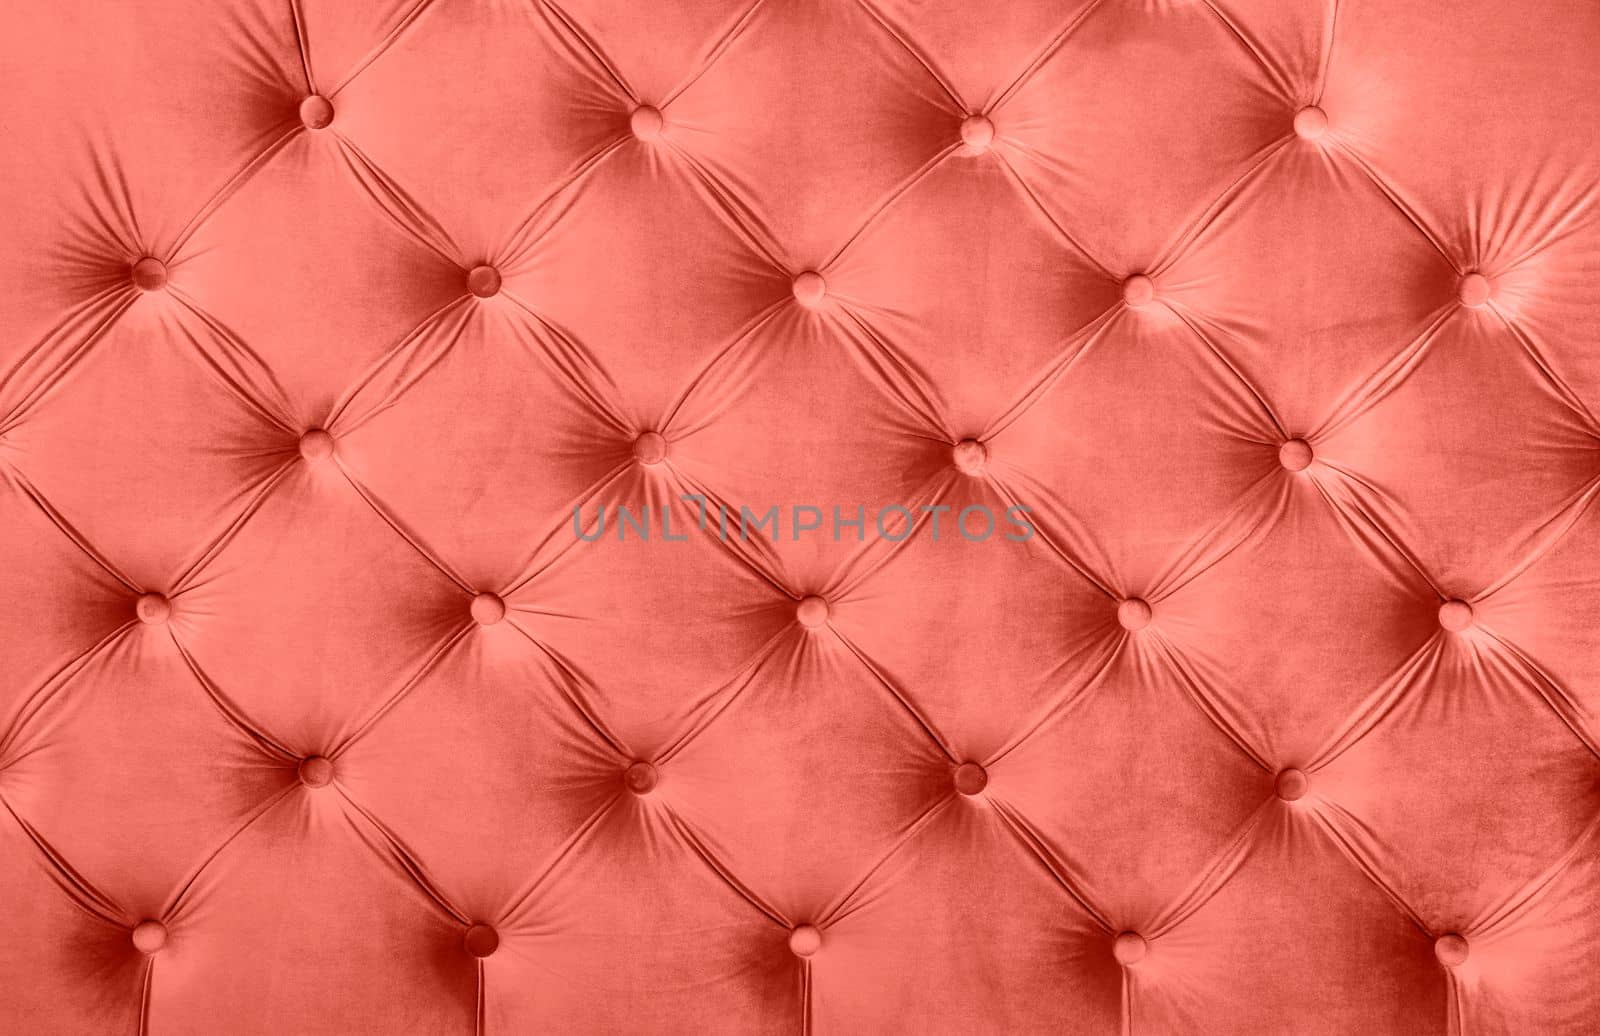 Coral toned pink velvet capitone textile background, retro Chesterfield style checkered soft tufted fabric furniture decoration with buttons, close up